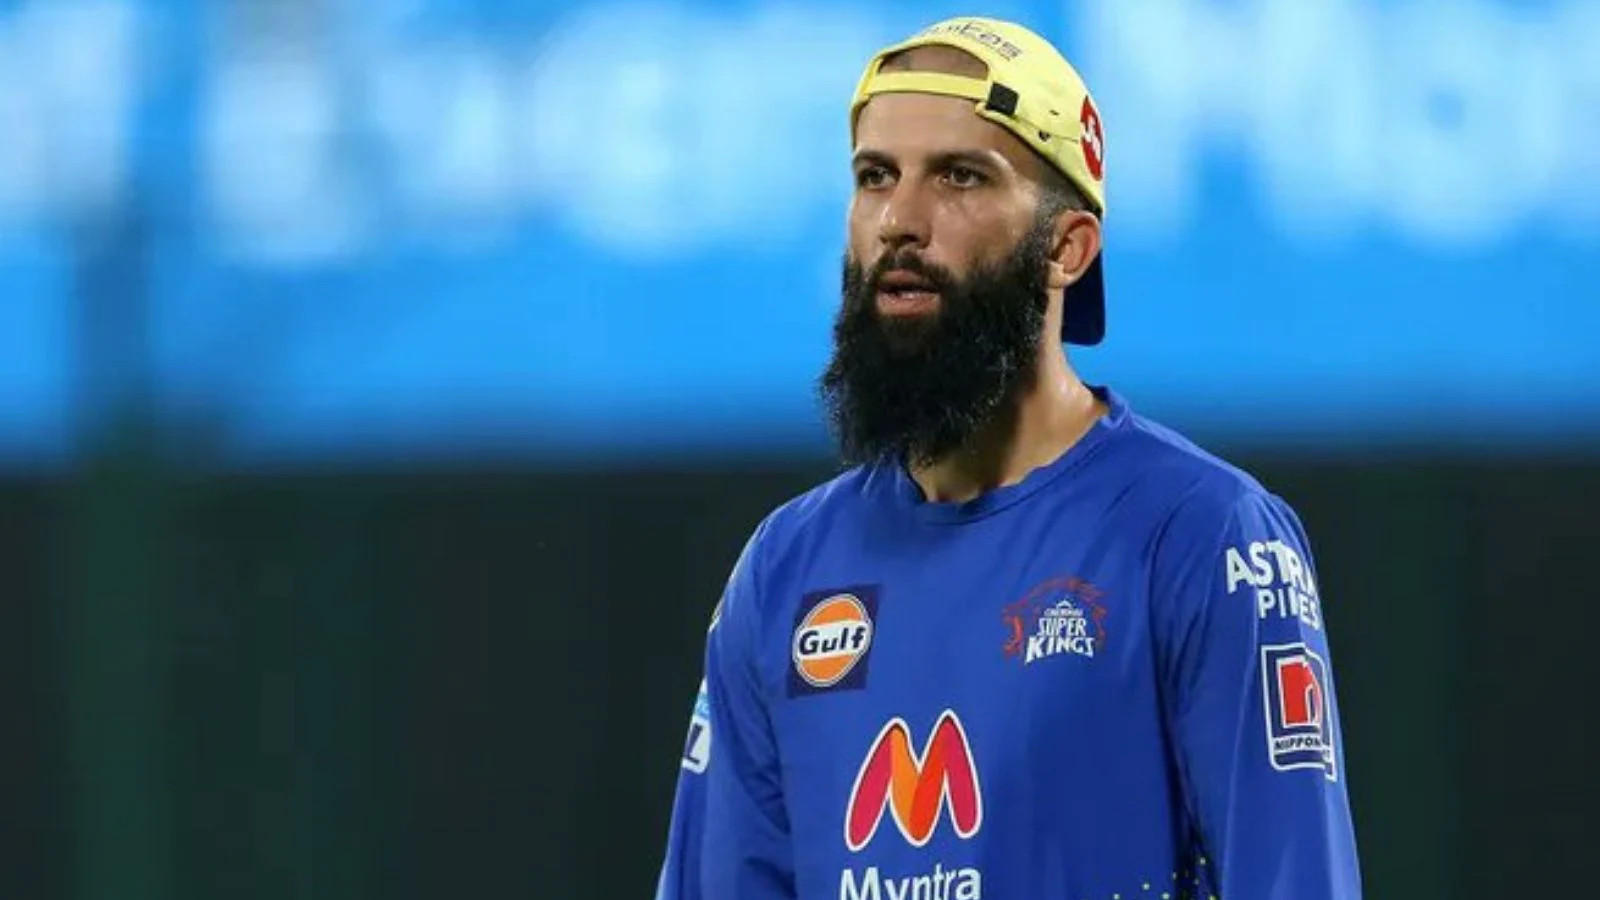 IPL 2022: Moeen Ali’s delay in arrival worries CSK; paperwork not yet issued for India travel- Report